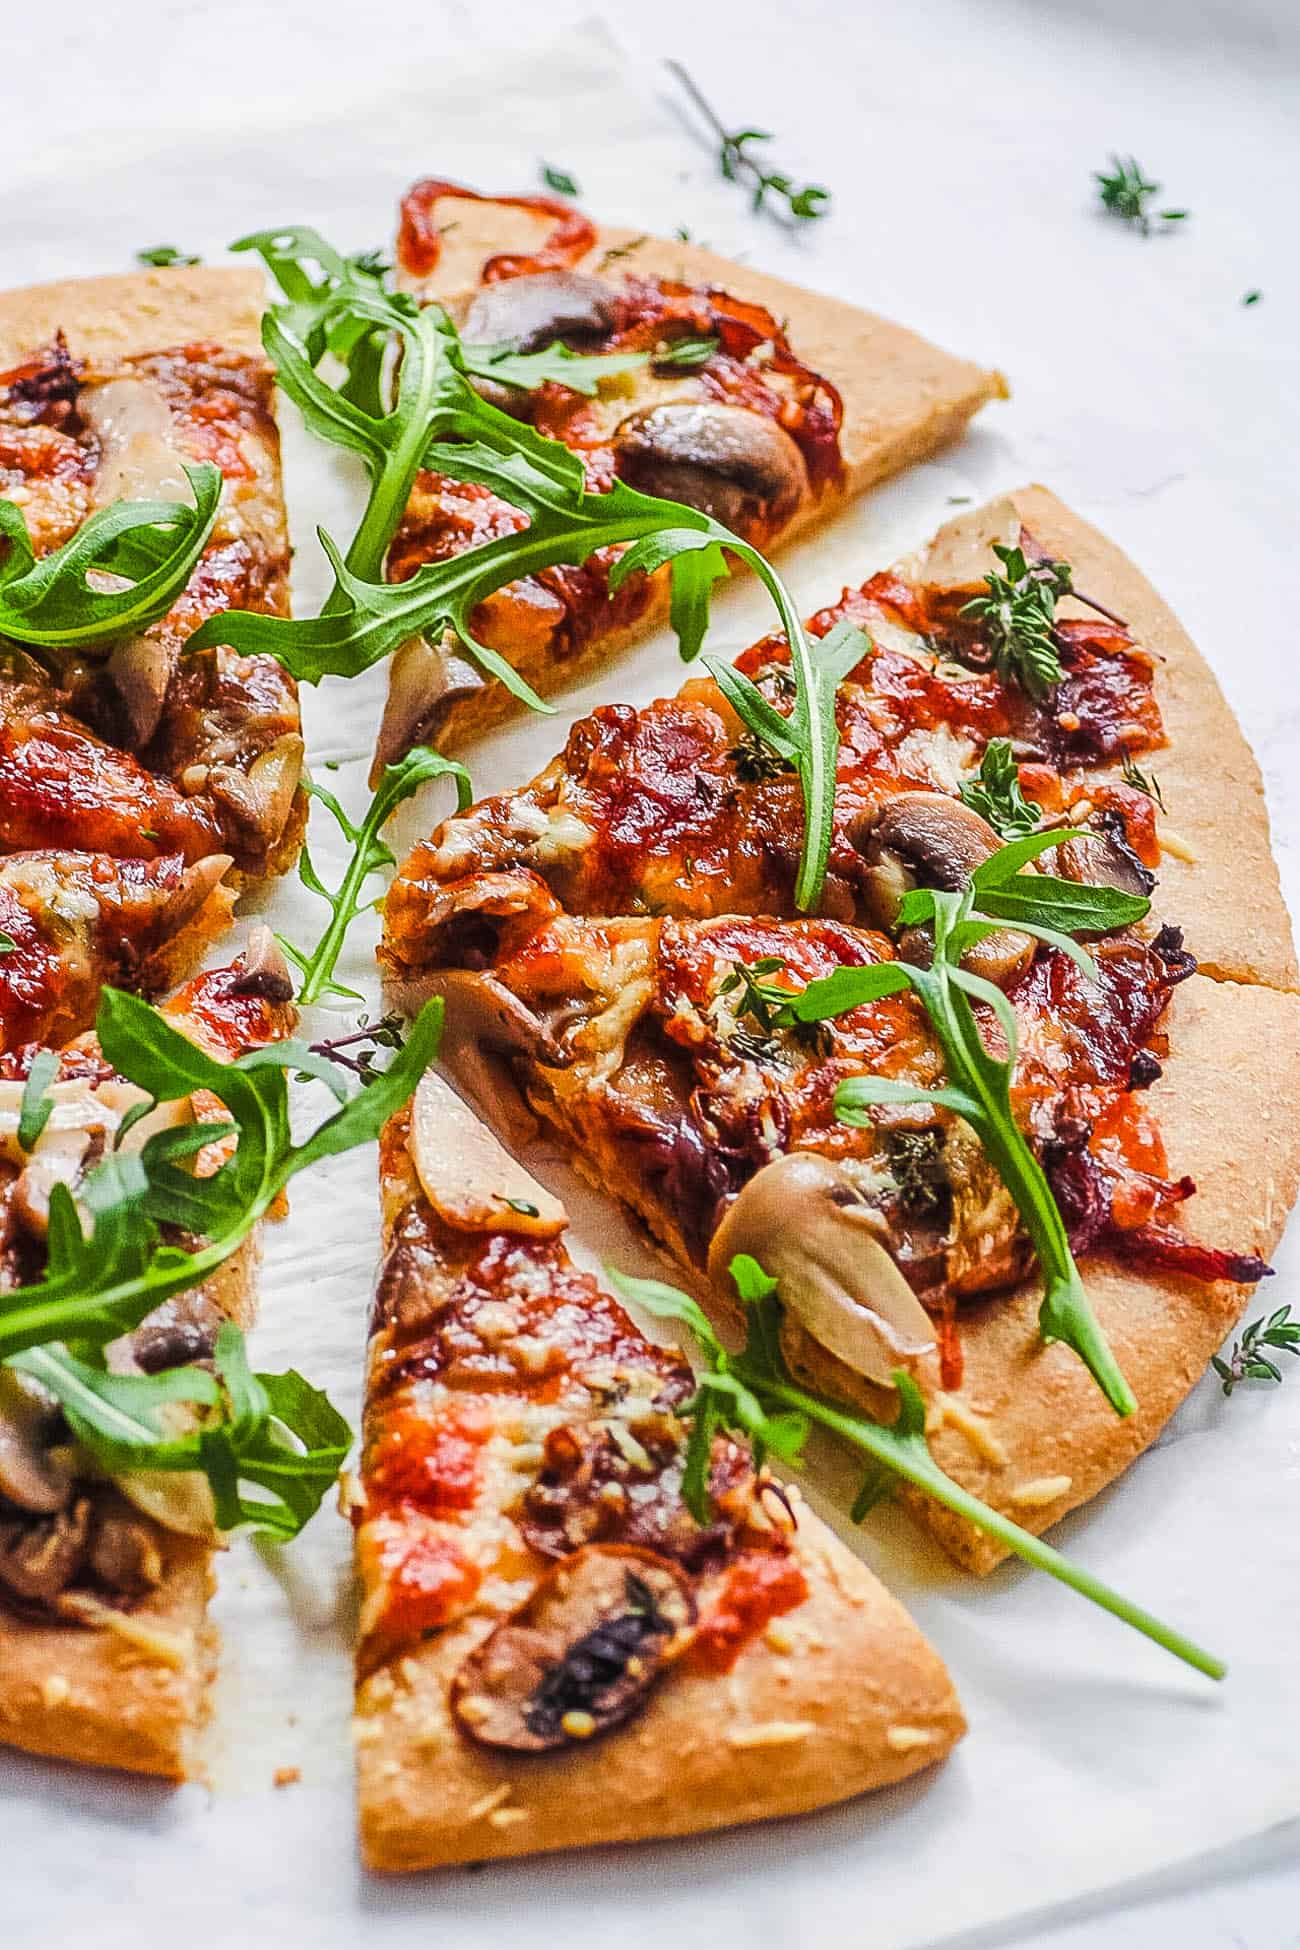 easy rustic pizza recipe with mushrooms and garlic cut into slices on parchment paper